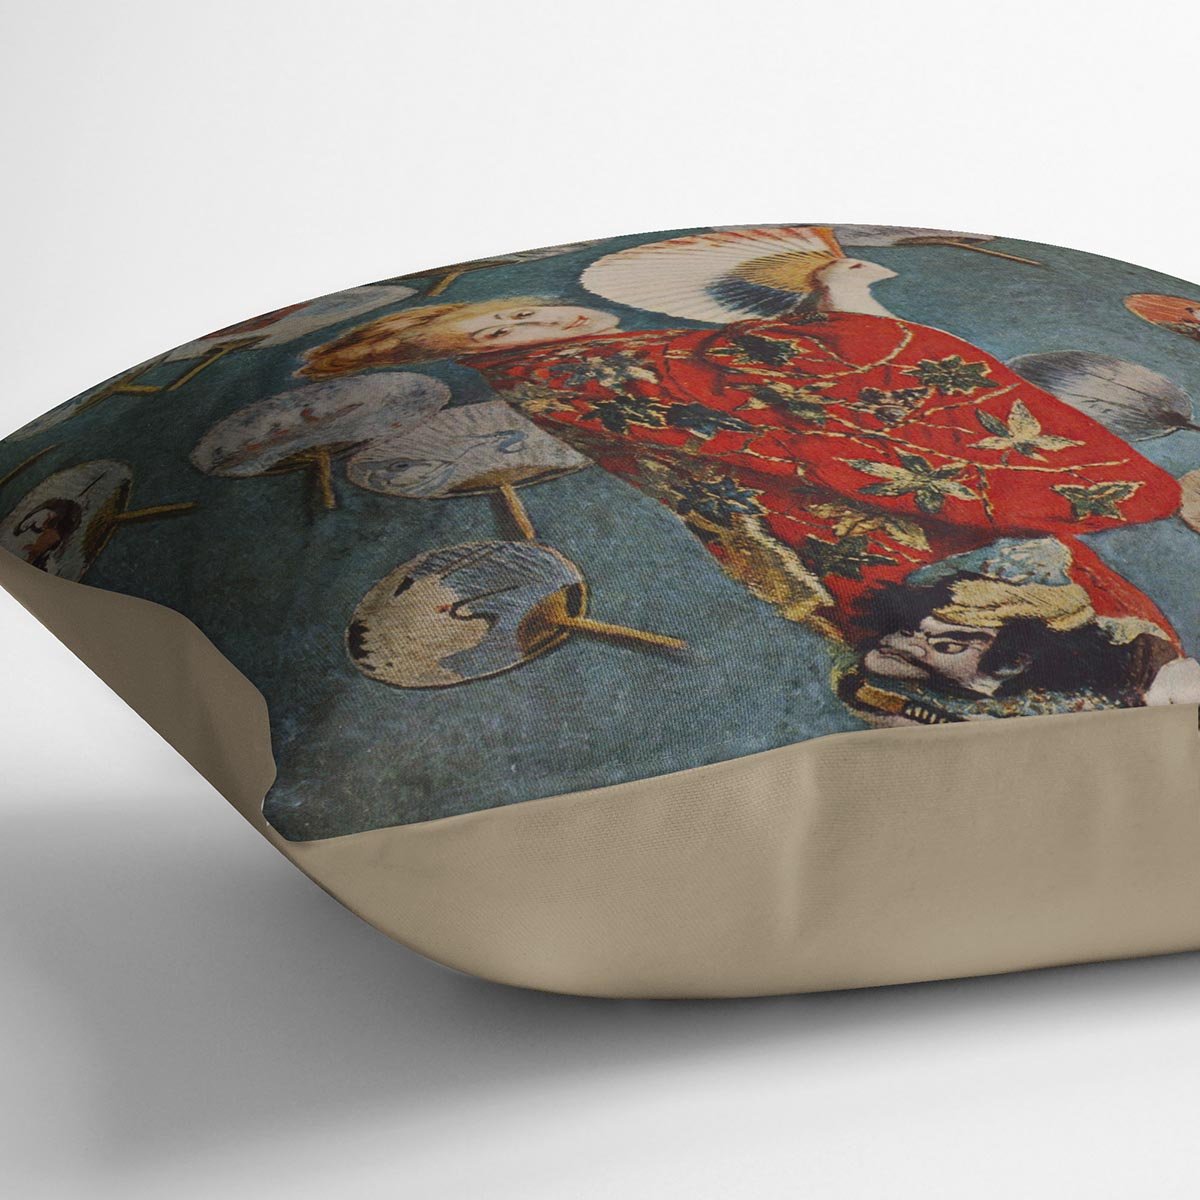 Camille in Japanese dress by Monet Throw Pillow